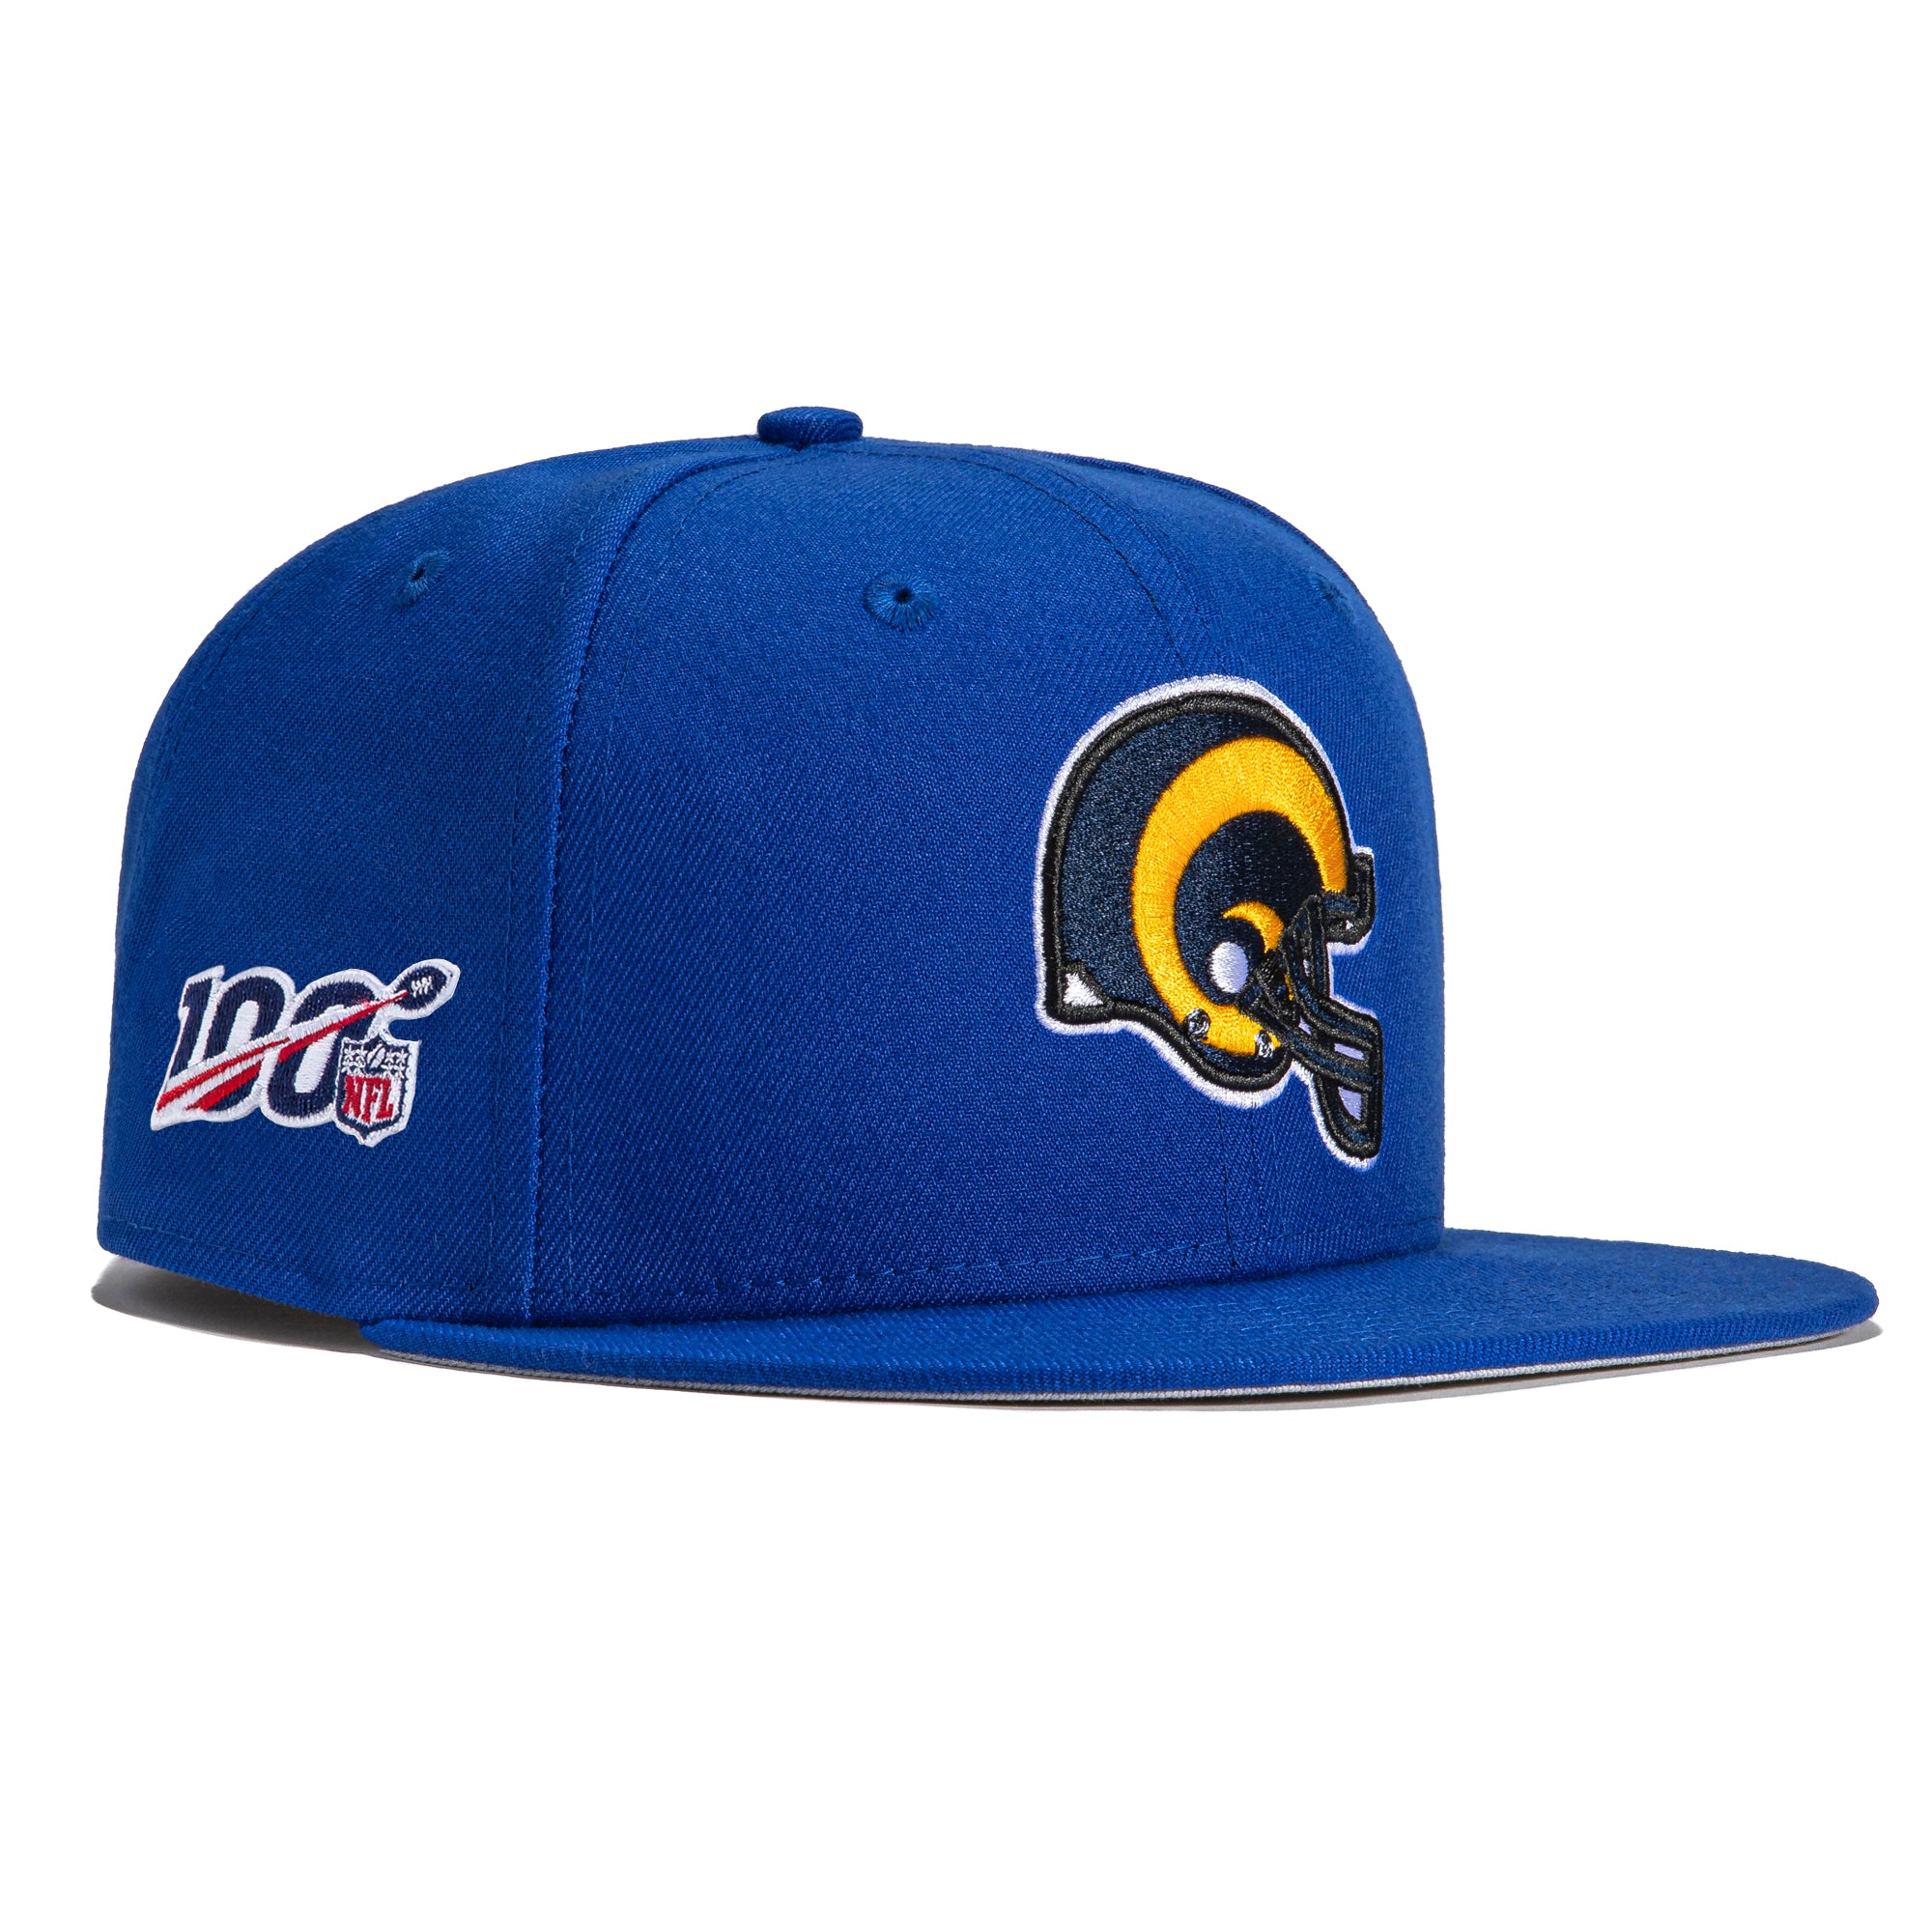 New Era 9FIFTY Los Angeles Rams 100th Anniversary Patch Snapback Hat - Royal